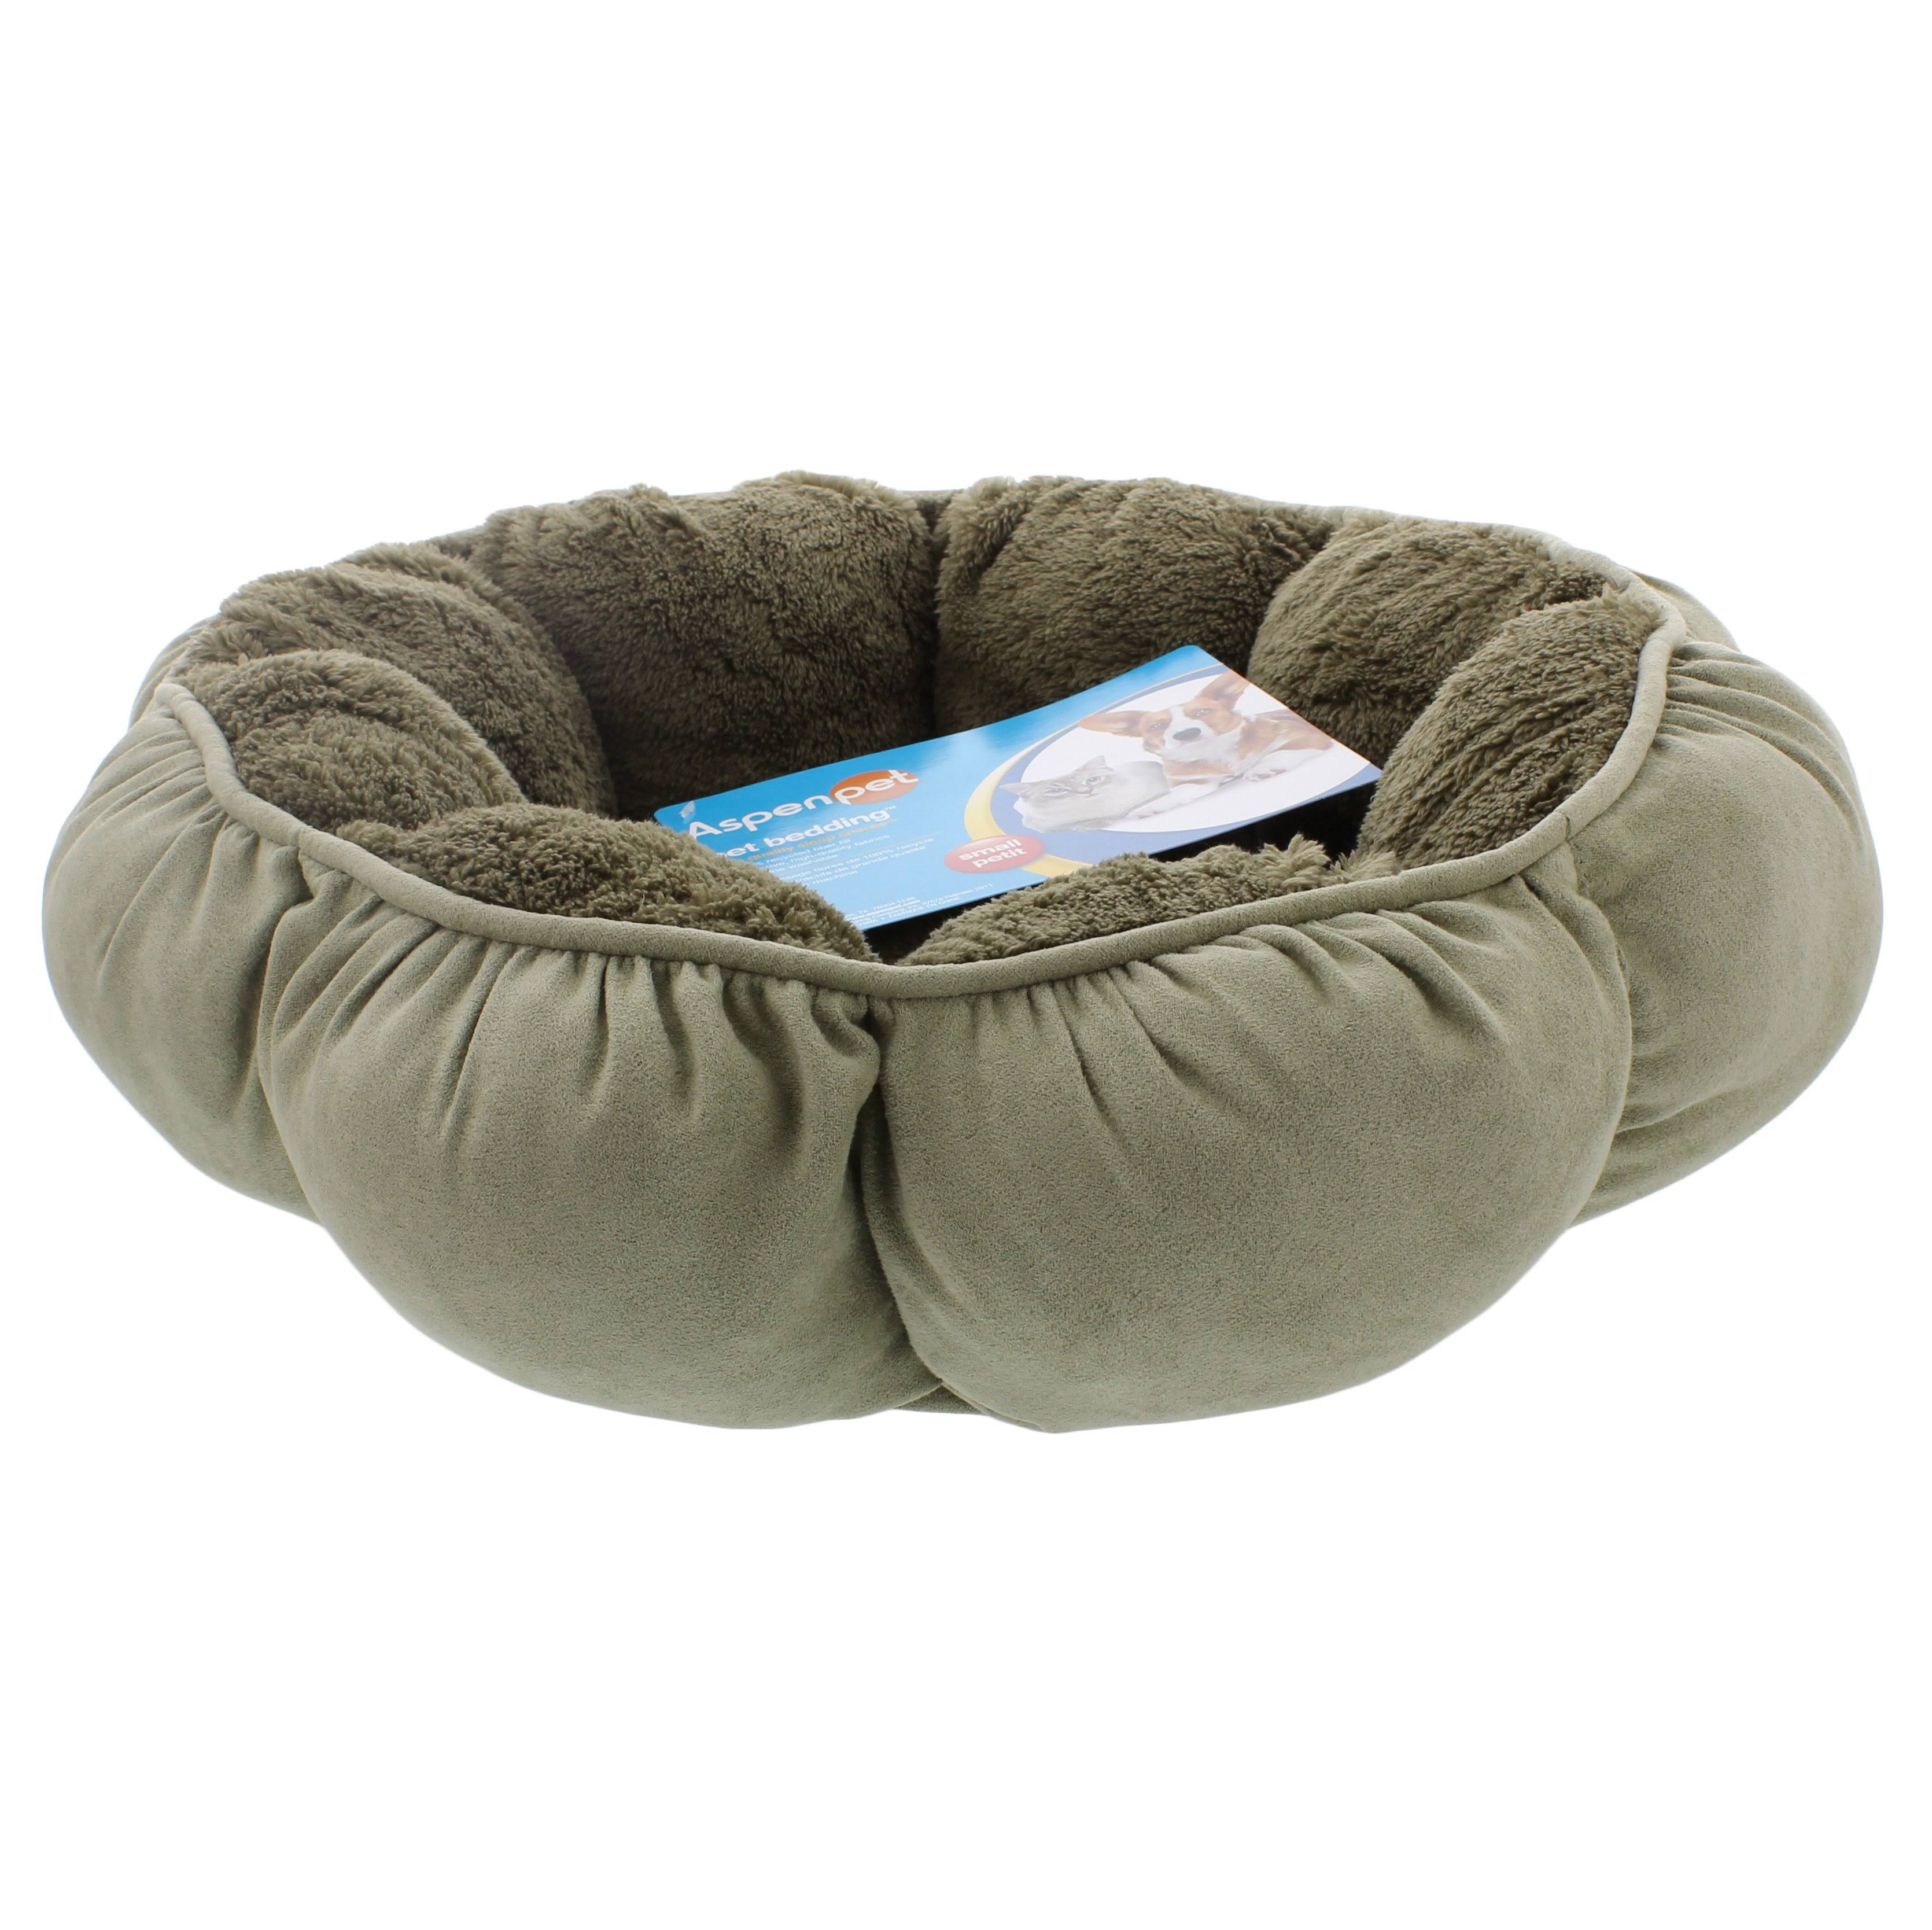 Aspen Pet Puffy Round Cat Bed - 18", Assorted Colors